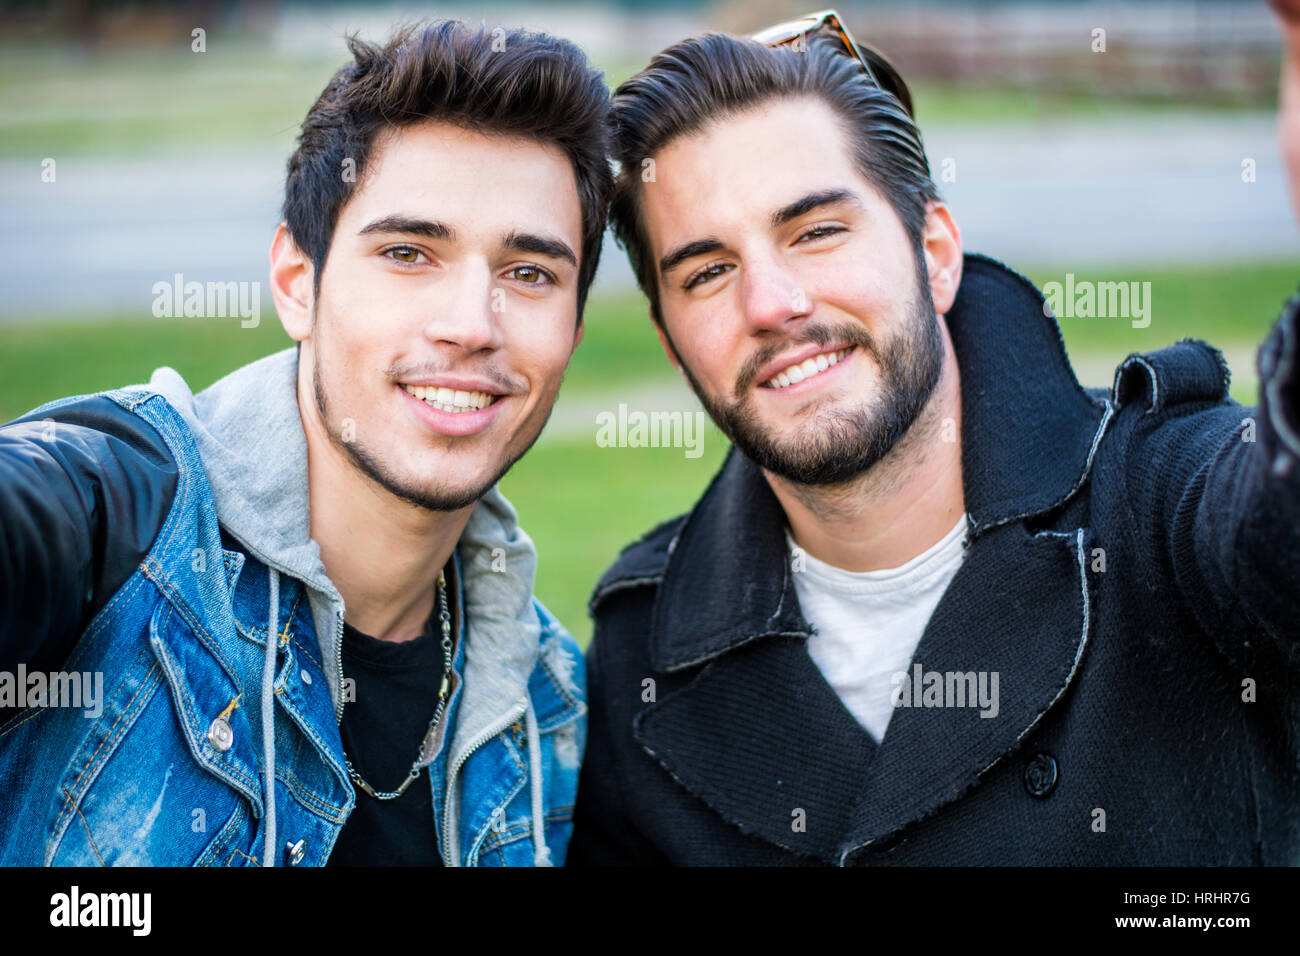 Two young men taking selfie Stock Photo